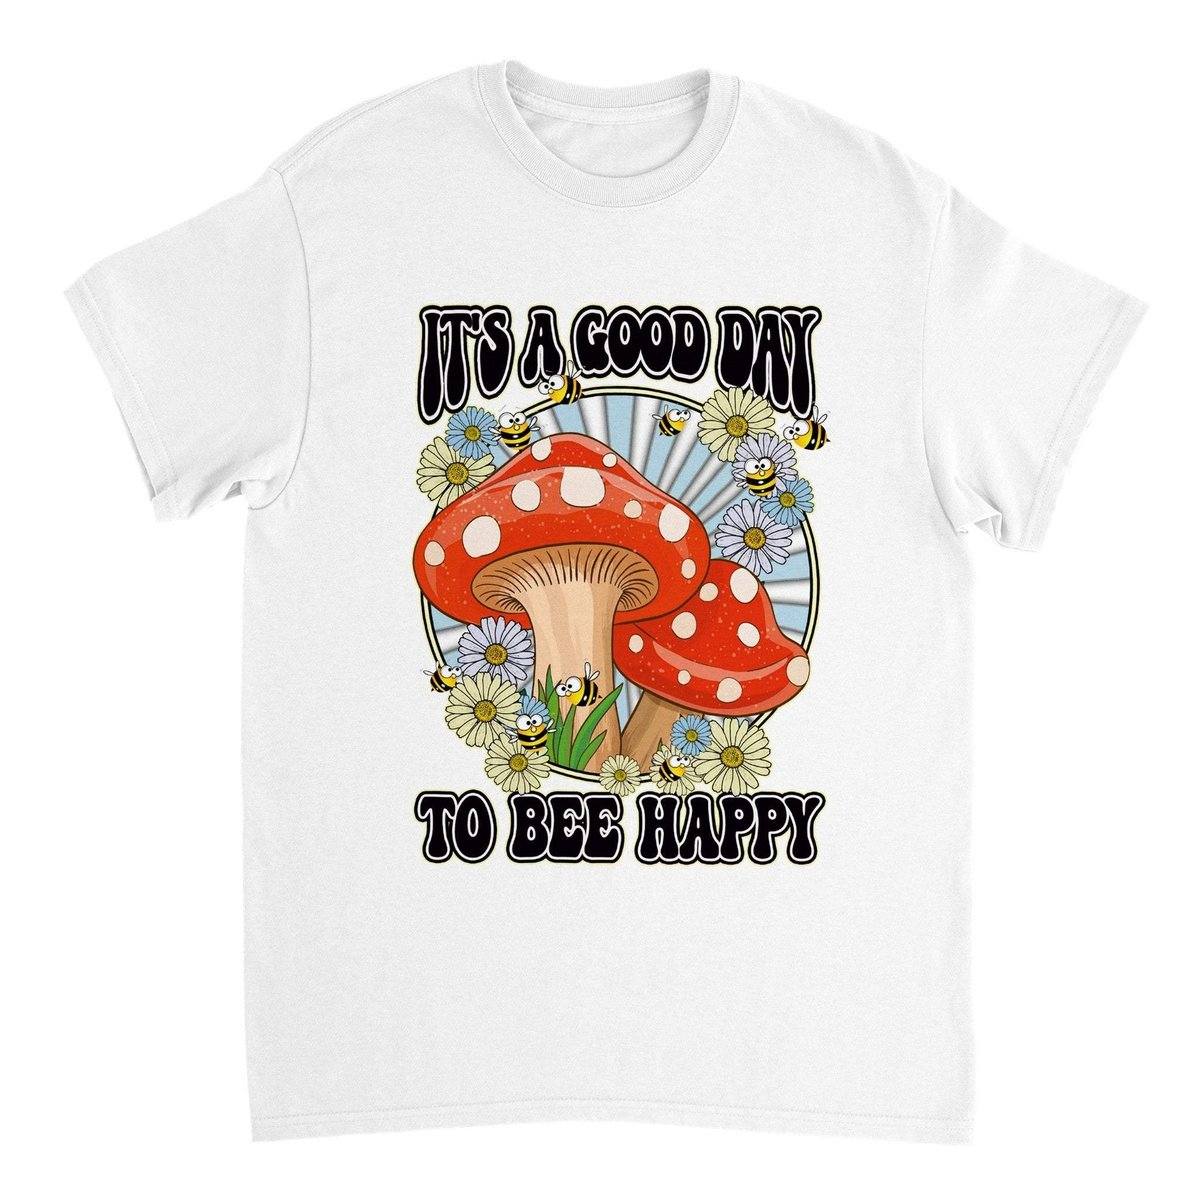 Its A Good Day To Bee Happy T-Shirt - Funny Bee Mushroom Tshirt - Unisex Crewneck T-shirt Australia Online Color White / S